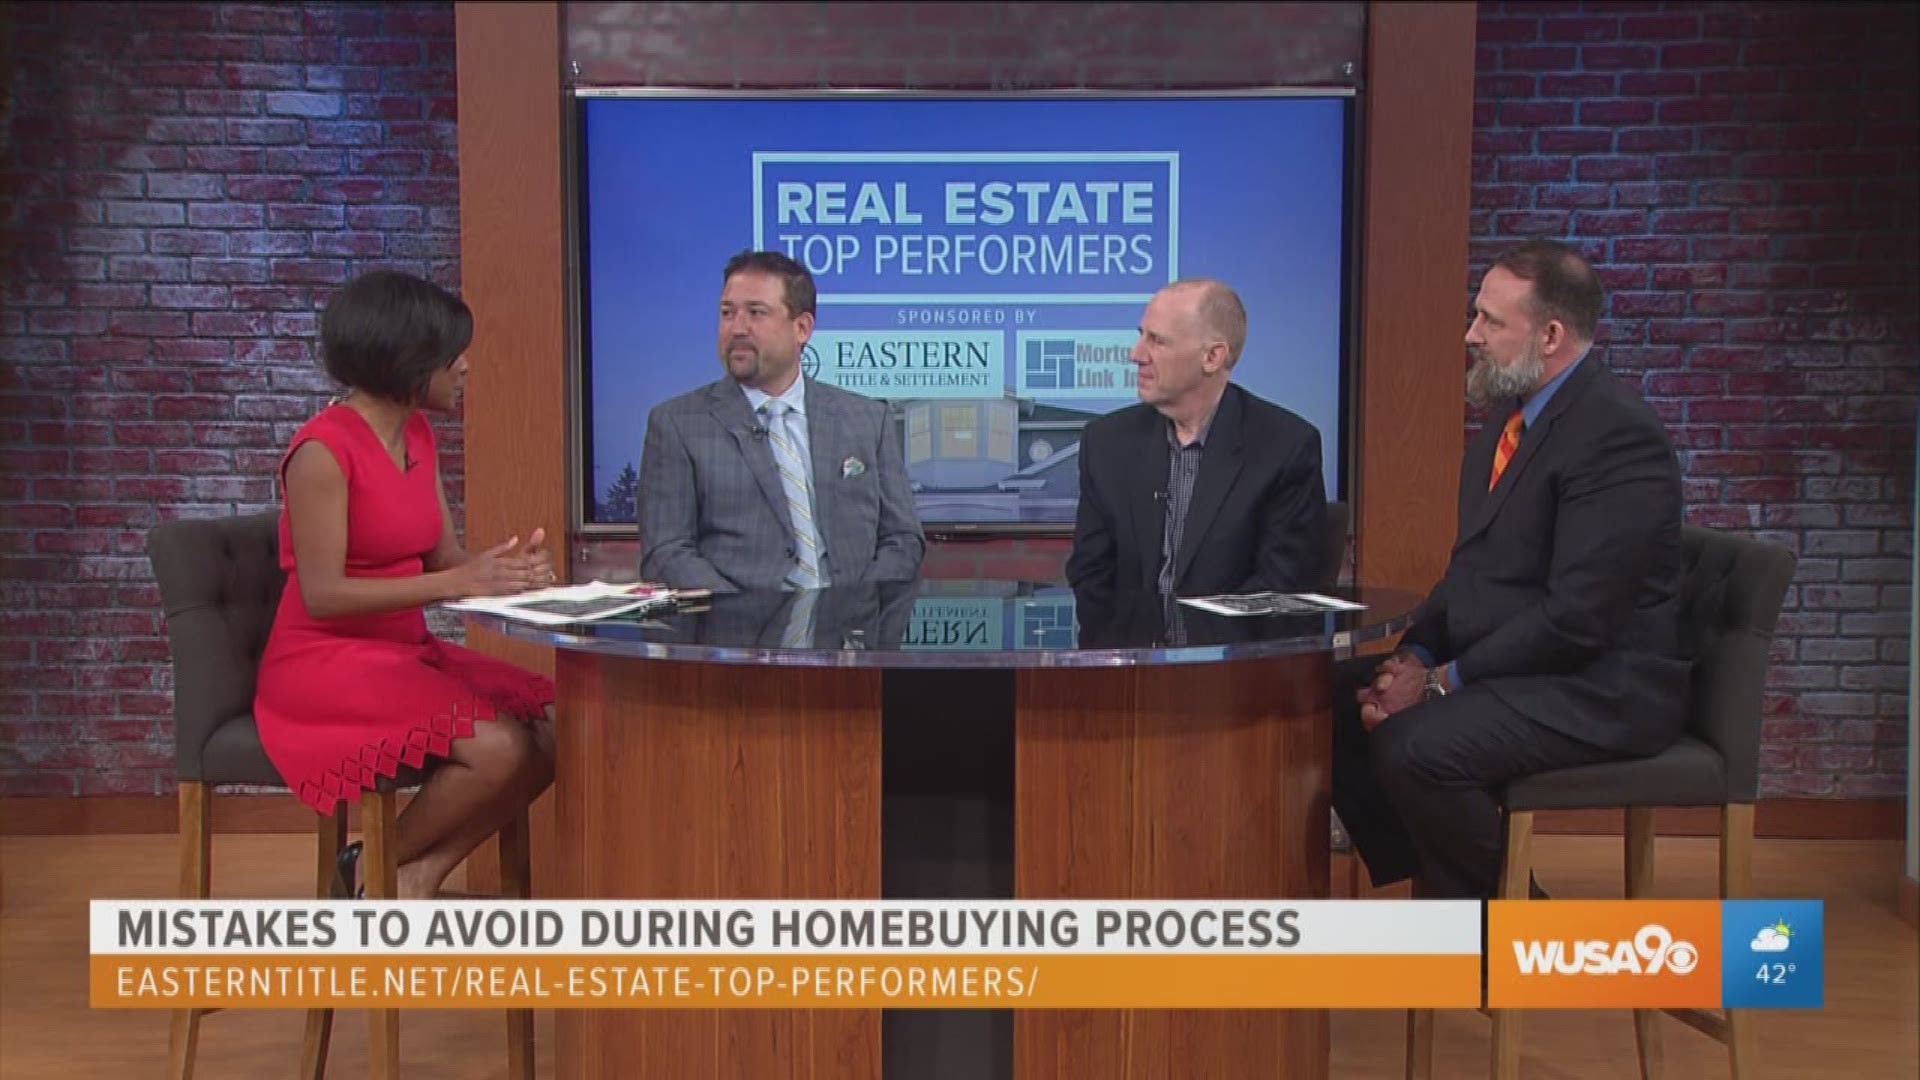 While the homebuying process can be stressful, our experts explain how to make sure your financing and closing goes smoothly.  Markette speaks to Jeff Ganz with Century 21 Redwood Realty, Carey Riel with The Mortgage Link, and Josh Greene with Eastern Title and Settlement about what NOT to do when buying a house.  To connect with a team to help you finance your home, visit easterntitle.net/real-estate-top-performers.